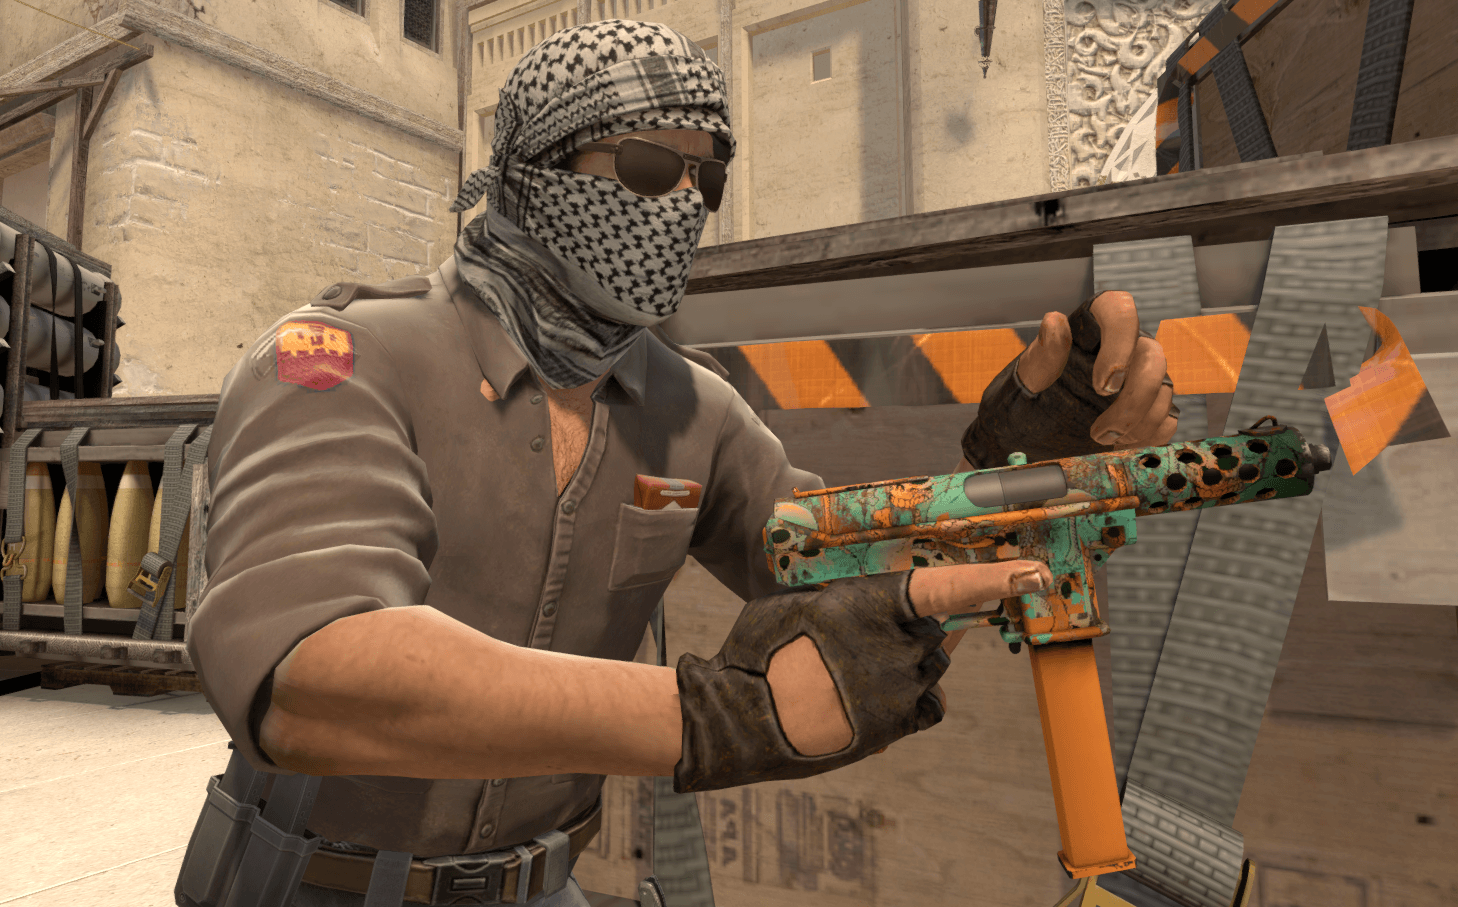 FTC sternly warns CS:GO gambling fraudsters not to do it again